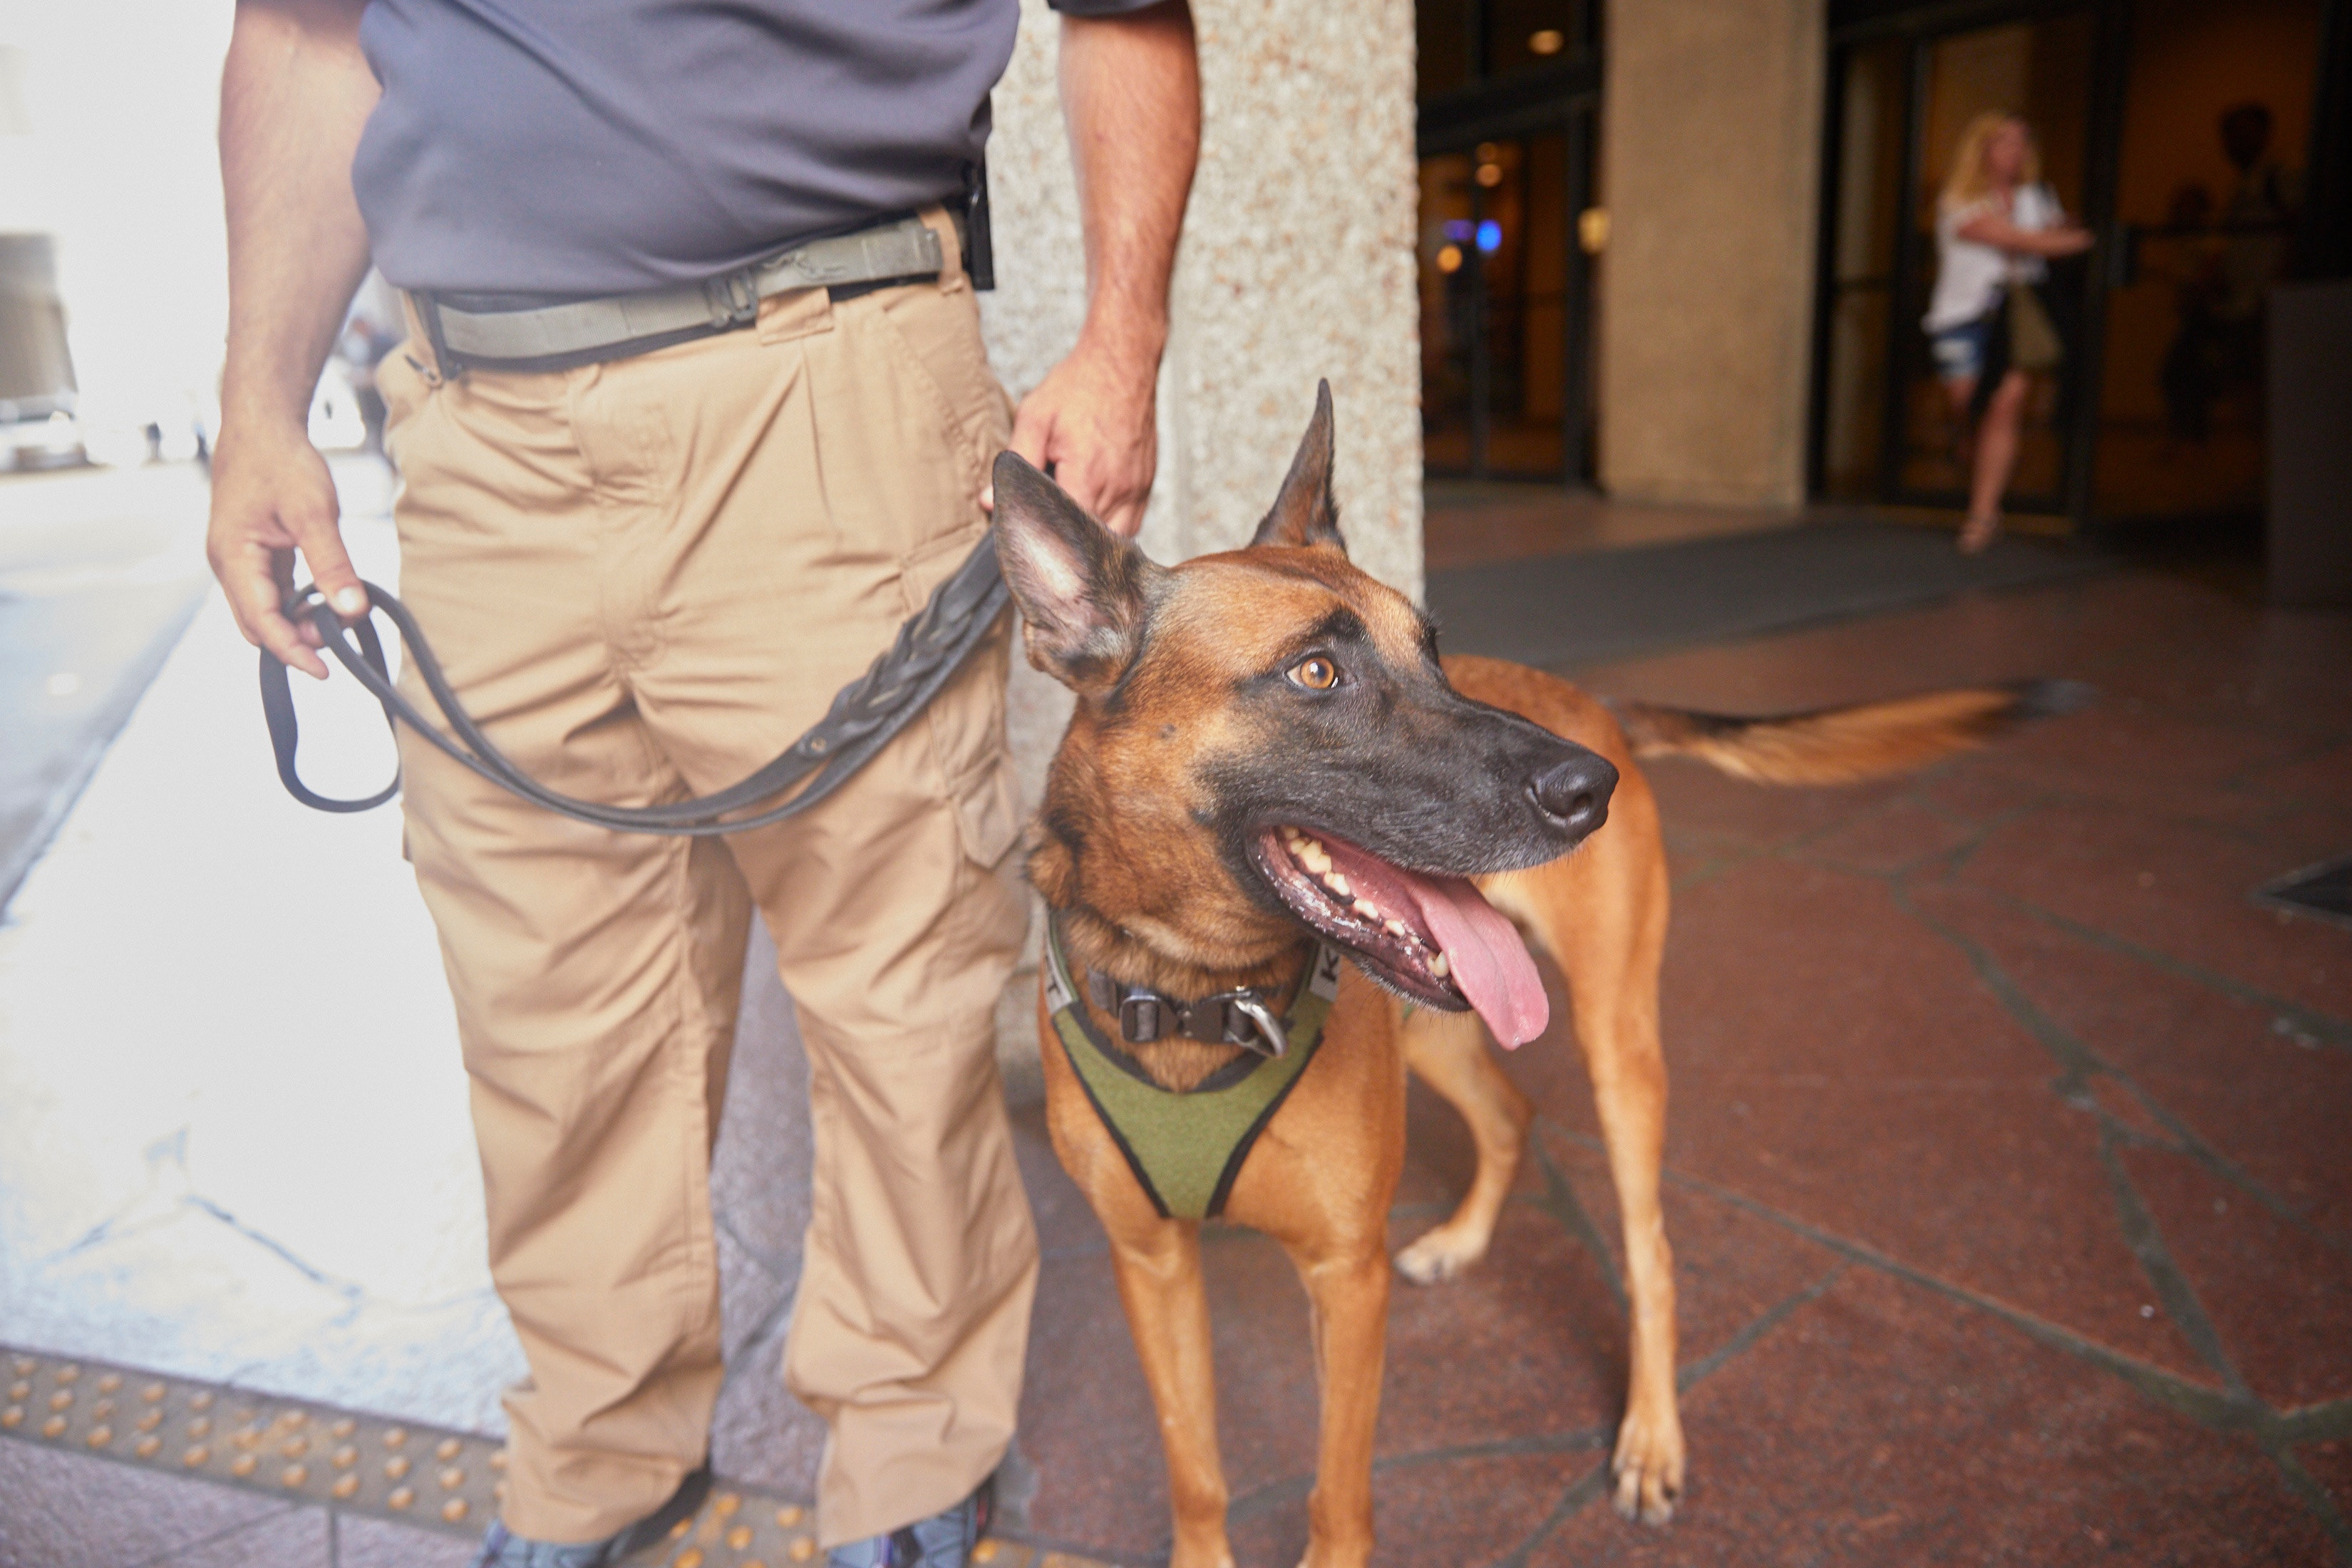 Joseph James and Max from Professional K-9 Solutions